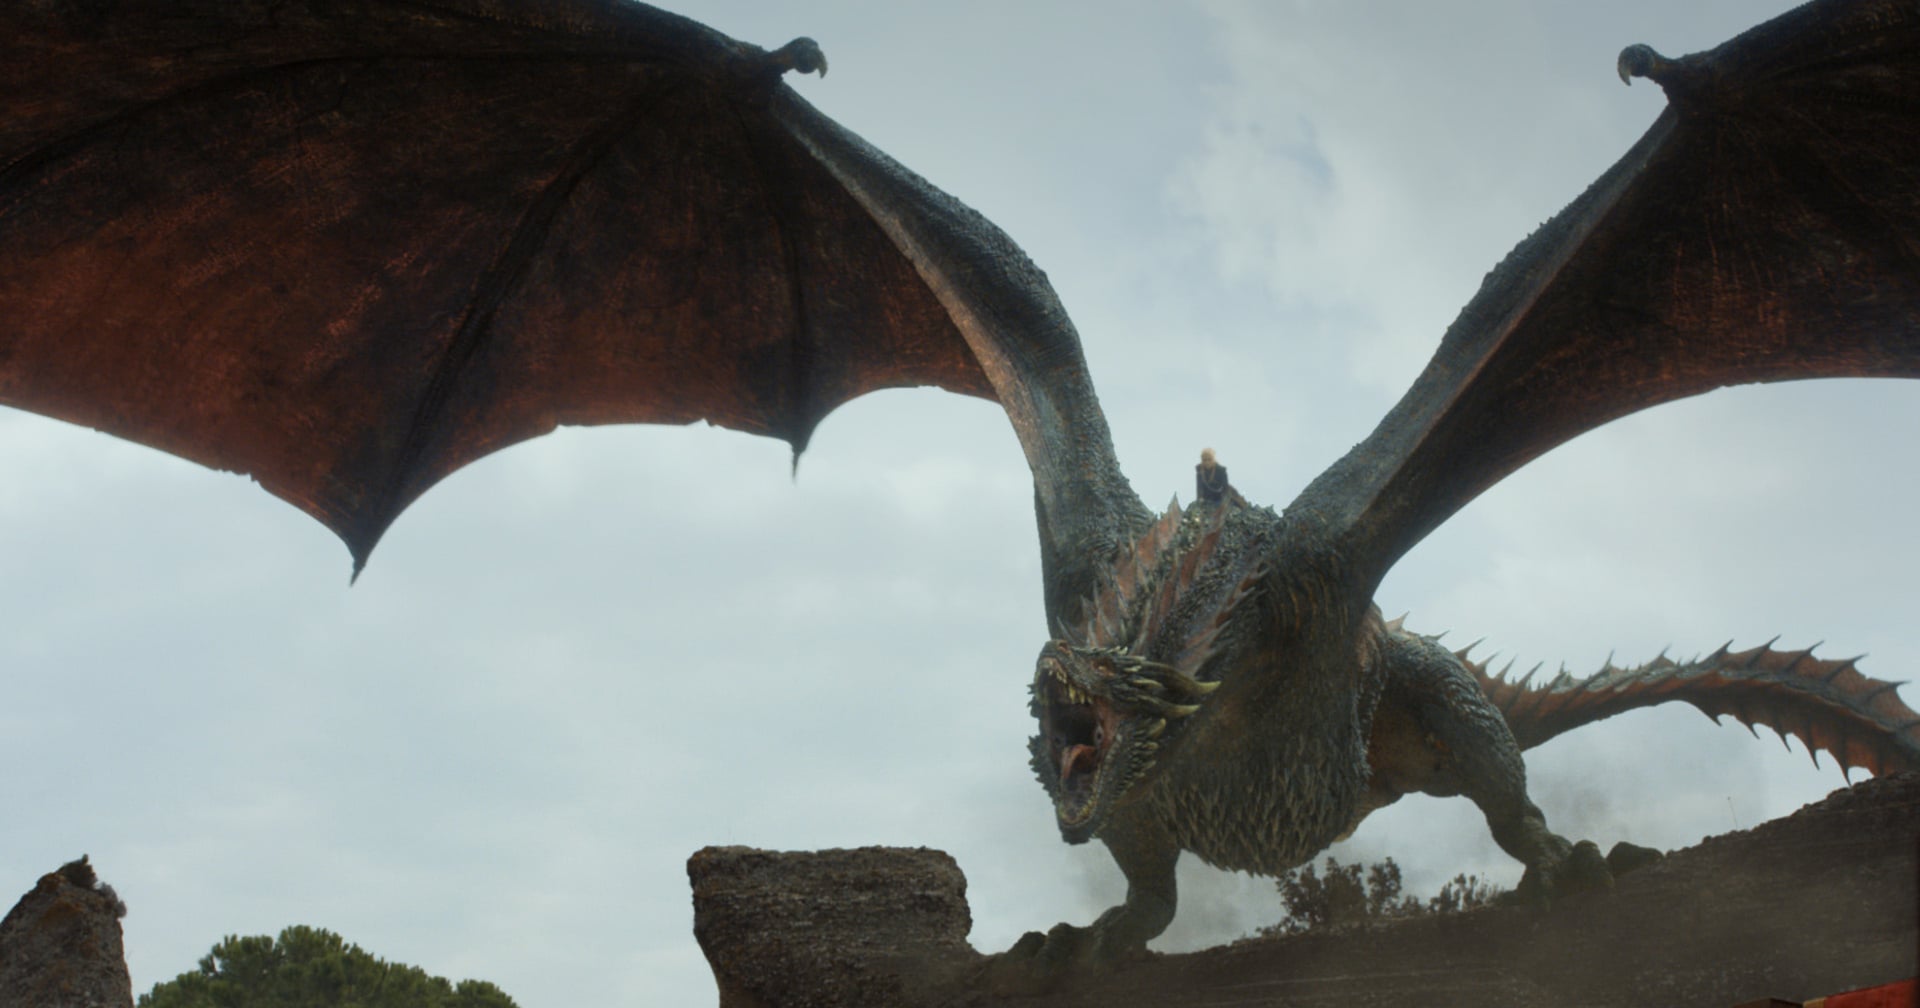 House of the Dragon: How does Game of Thrones connect to new show